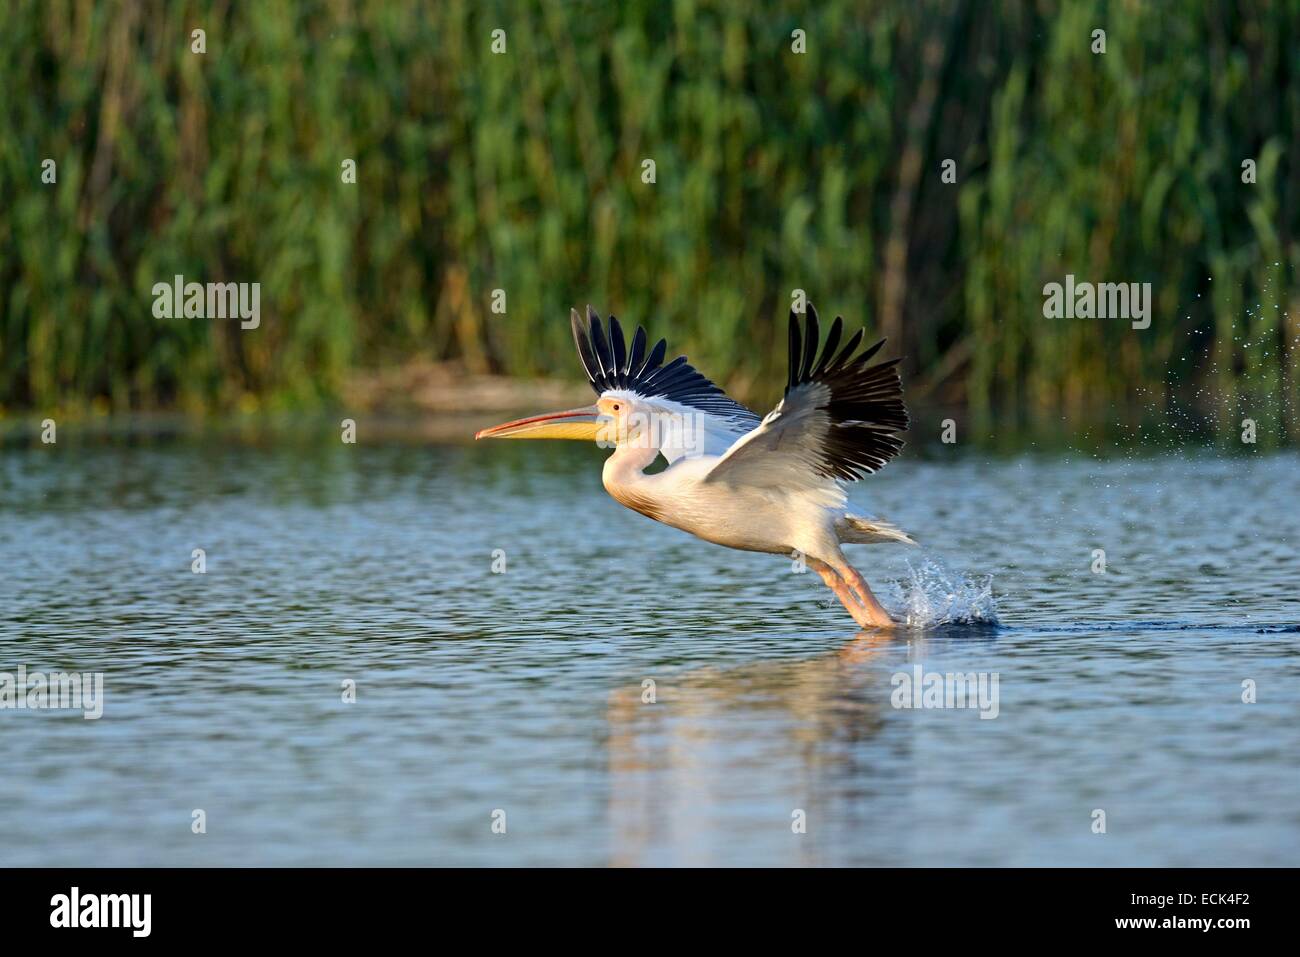 Romania, Danube Delta listed as World Heritage by UNESCO, White Pelican (Pelecanus onocrotalus) waterfowl in flight over a lake delta Stock Photo